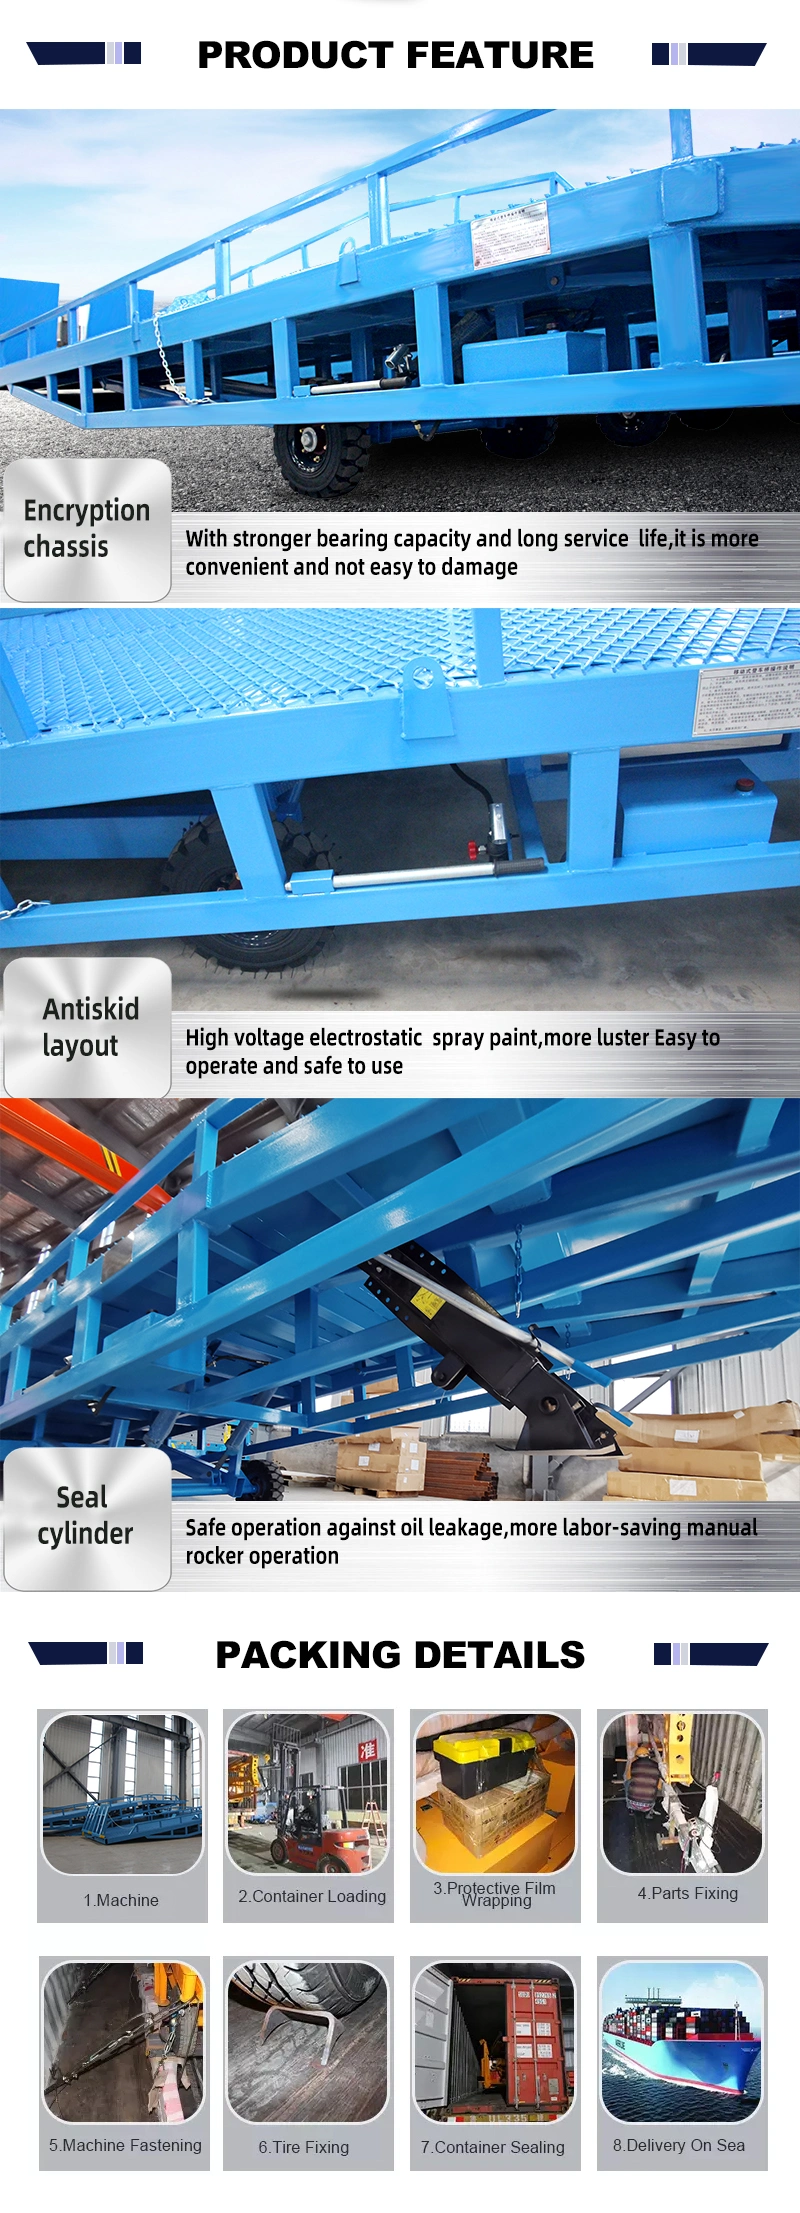 4ton 6ton 10ton Container Mobile Yard Ramp Forklift Car Truck Loading Discharge Goods Loading Unloading Ramp